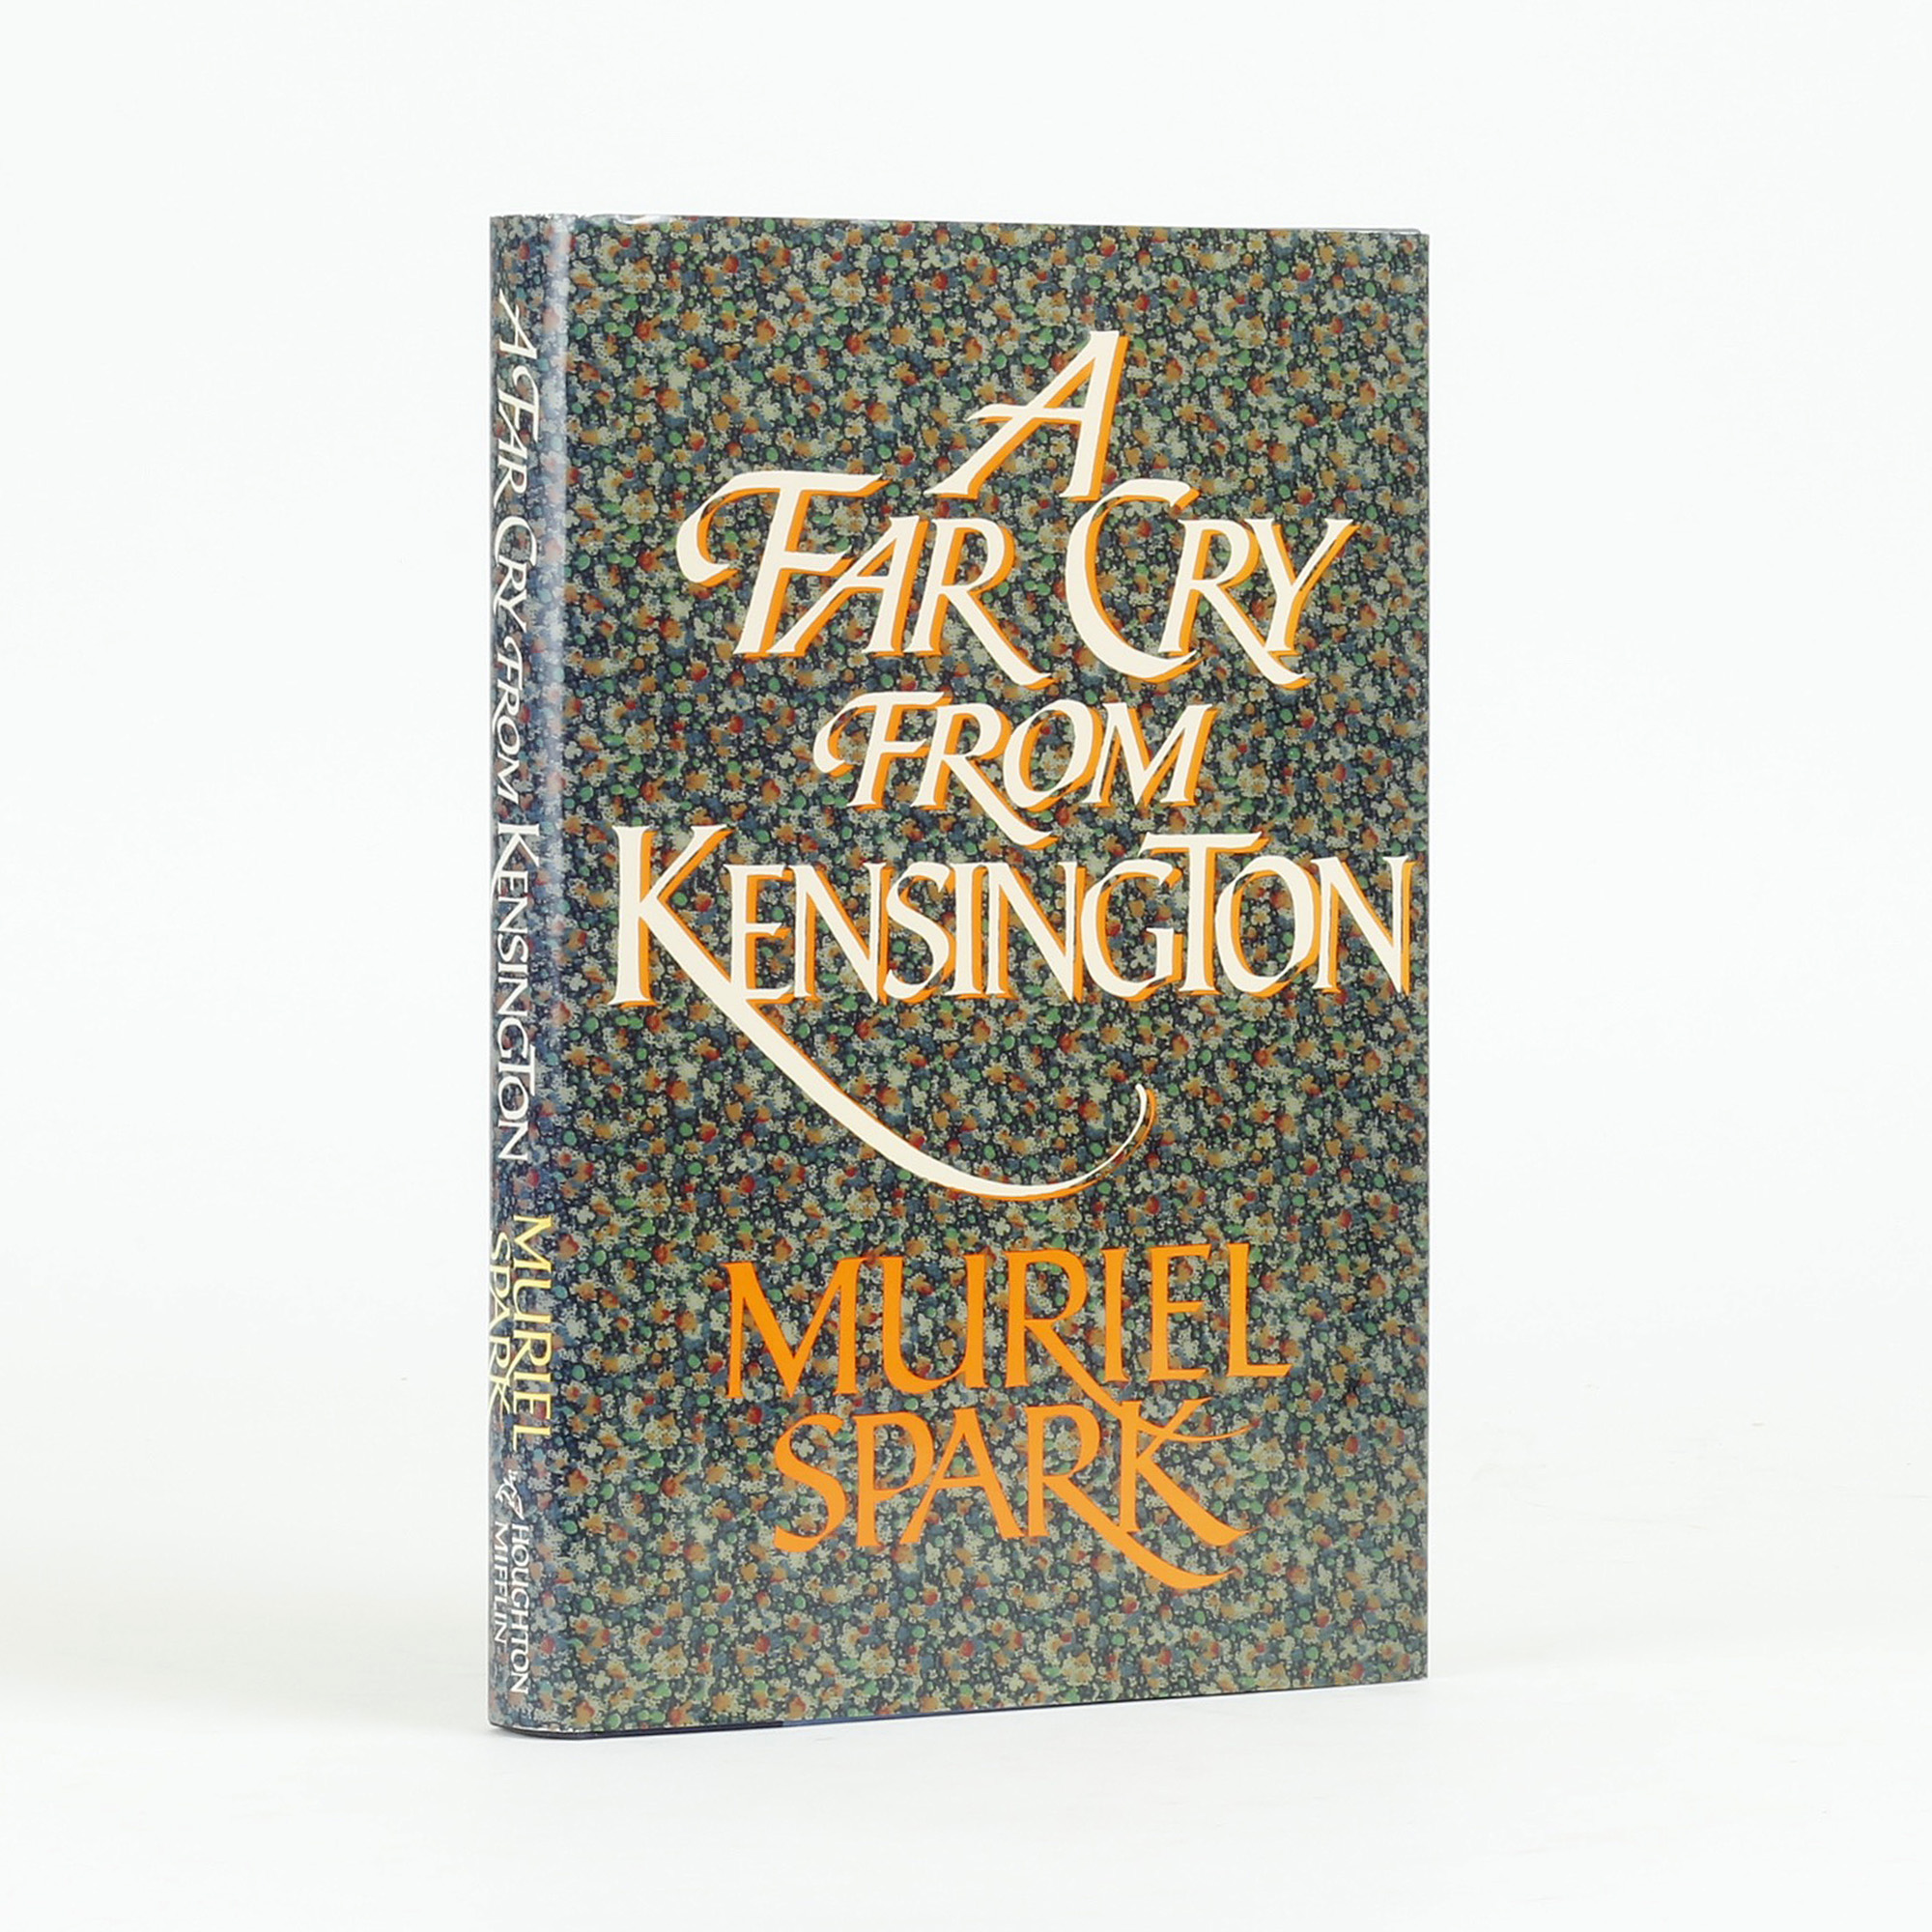 A Far Cry From Kensington By Spark Muriel Jonkers Rare Books